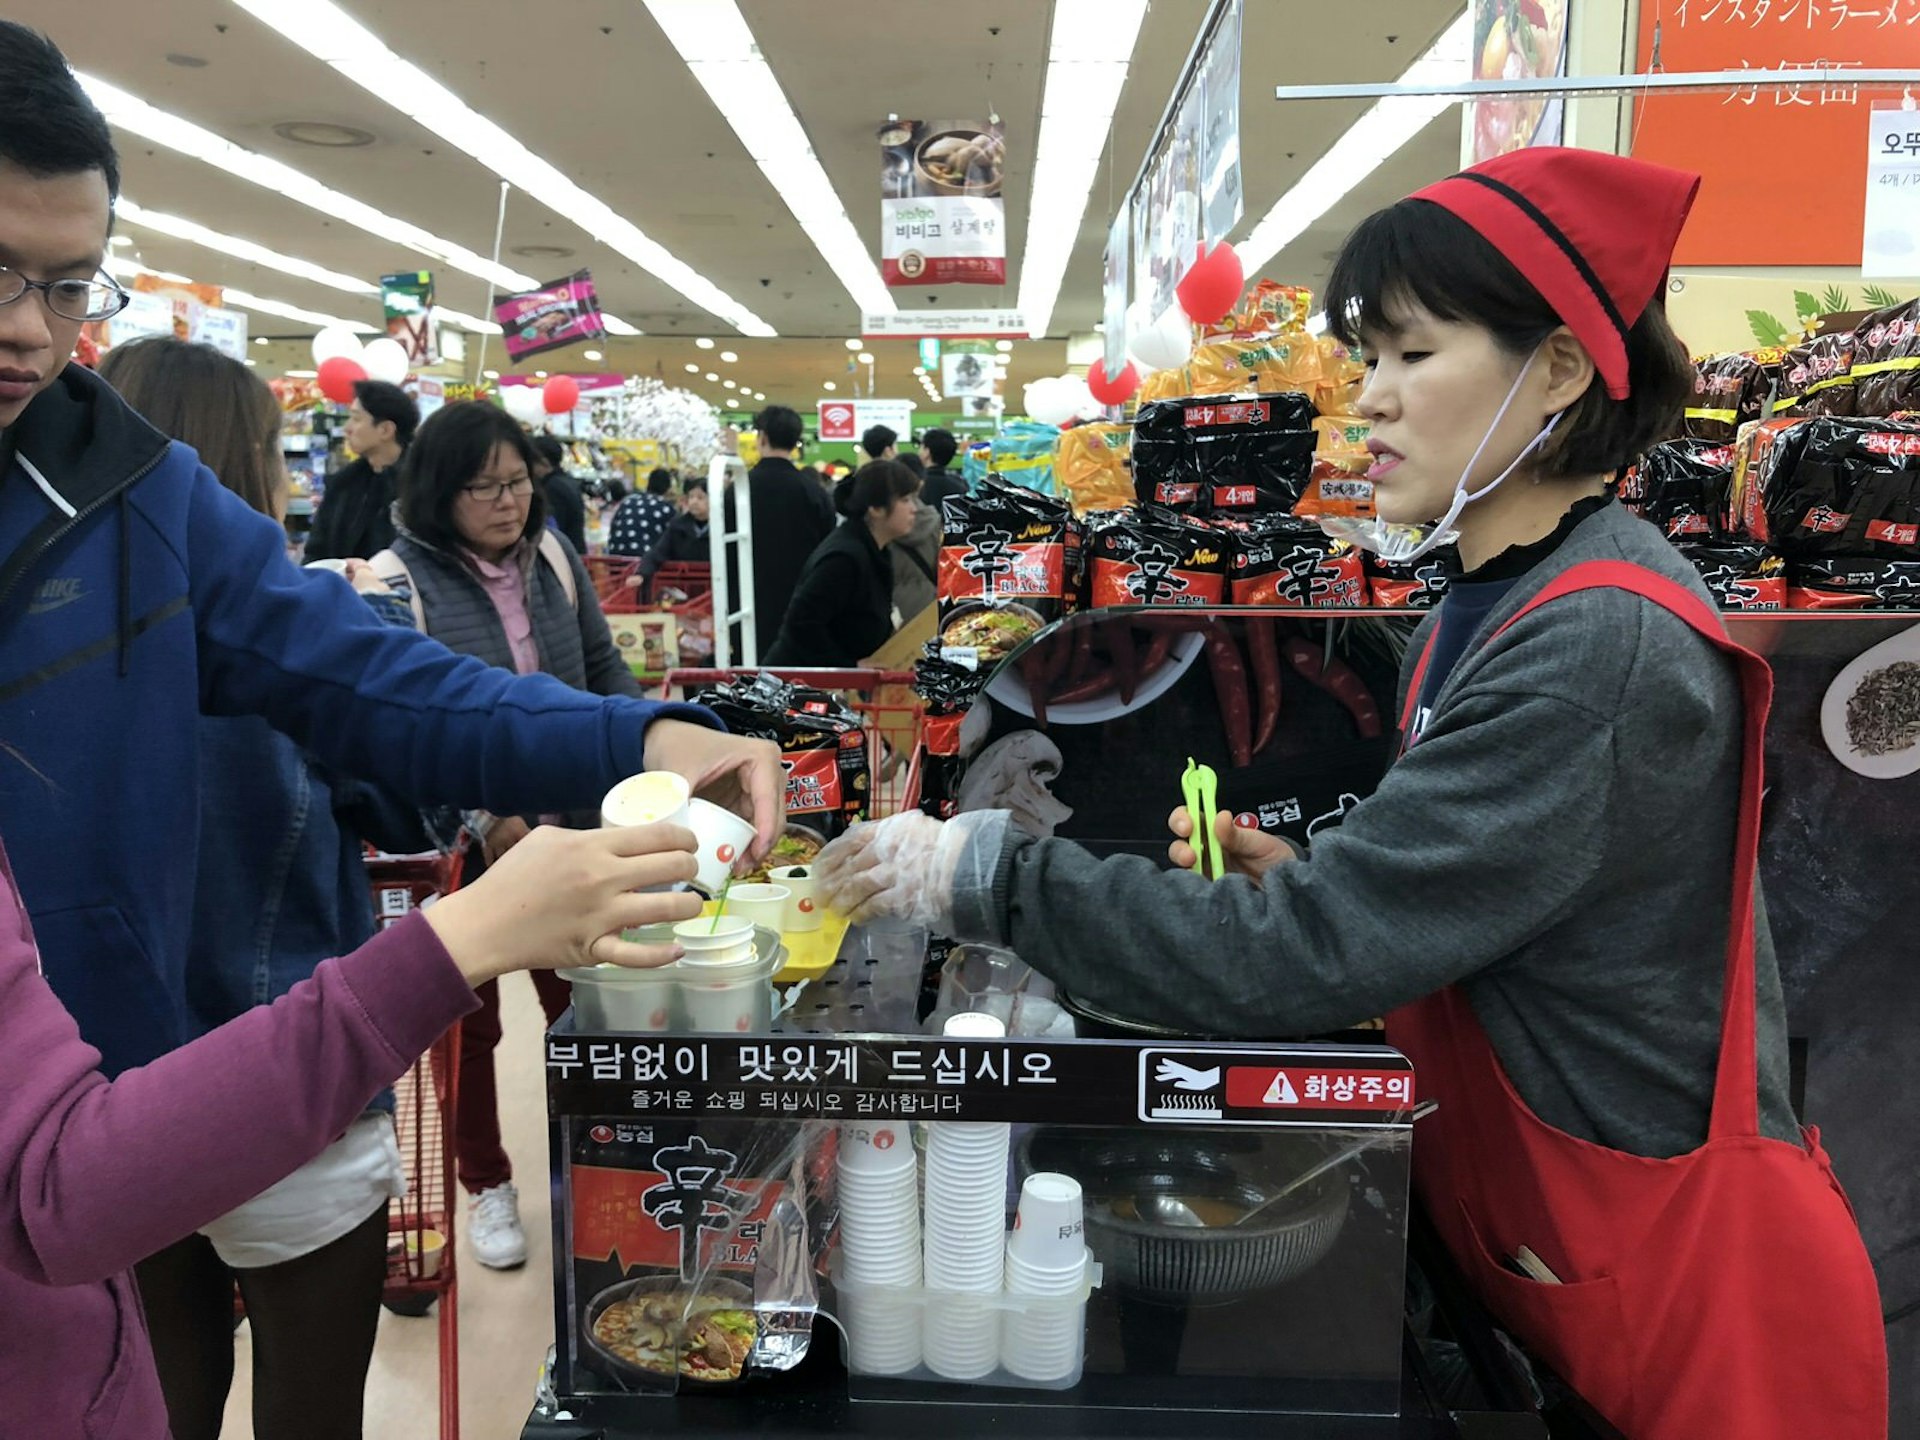 A sample-giver clad in a red apron and hat offer samples in paper cups. Free dinner? Opt for samples at the Lotte Mart in Seoul Station © Hahna Yoon / Lonely Planet